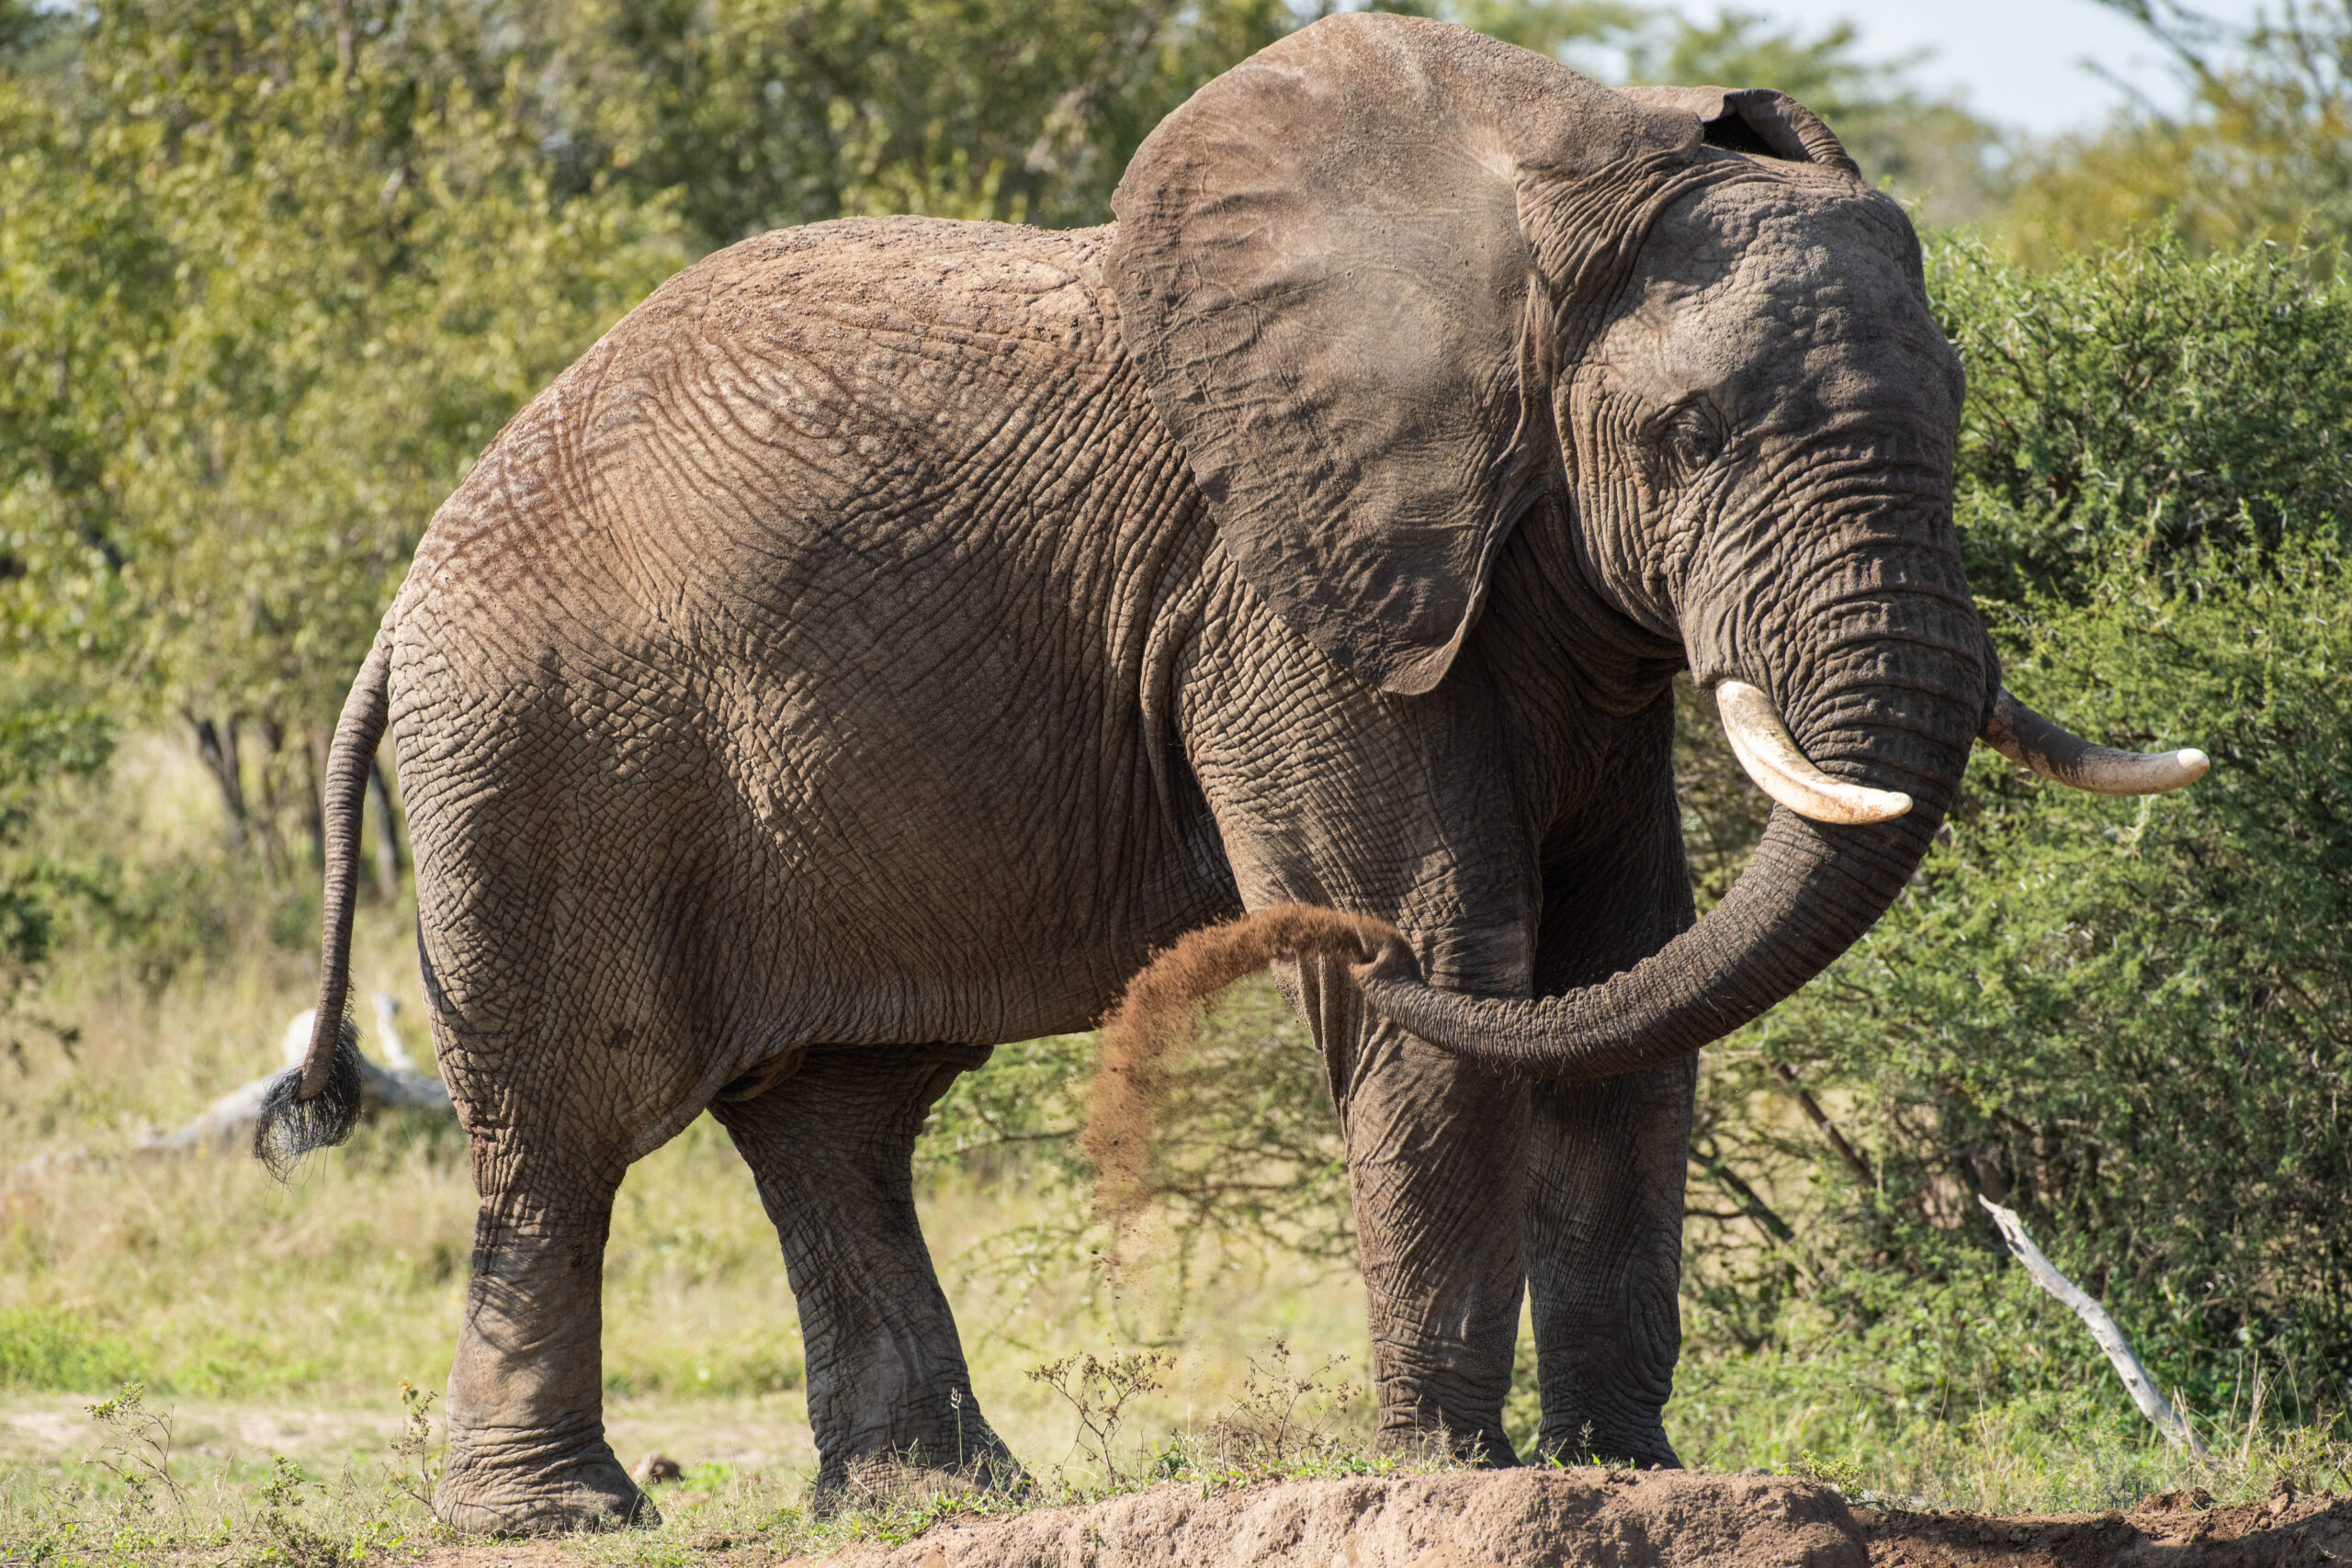 Elephants: Trunk may be one of most sensitive body parts of any